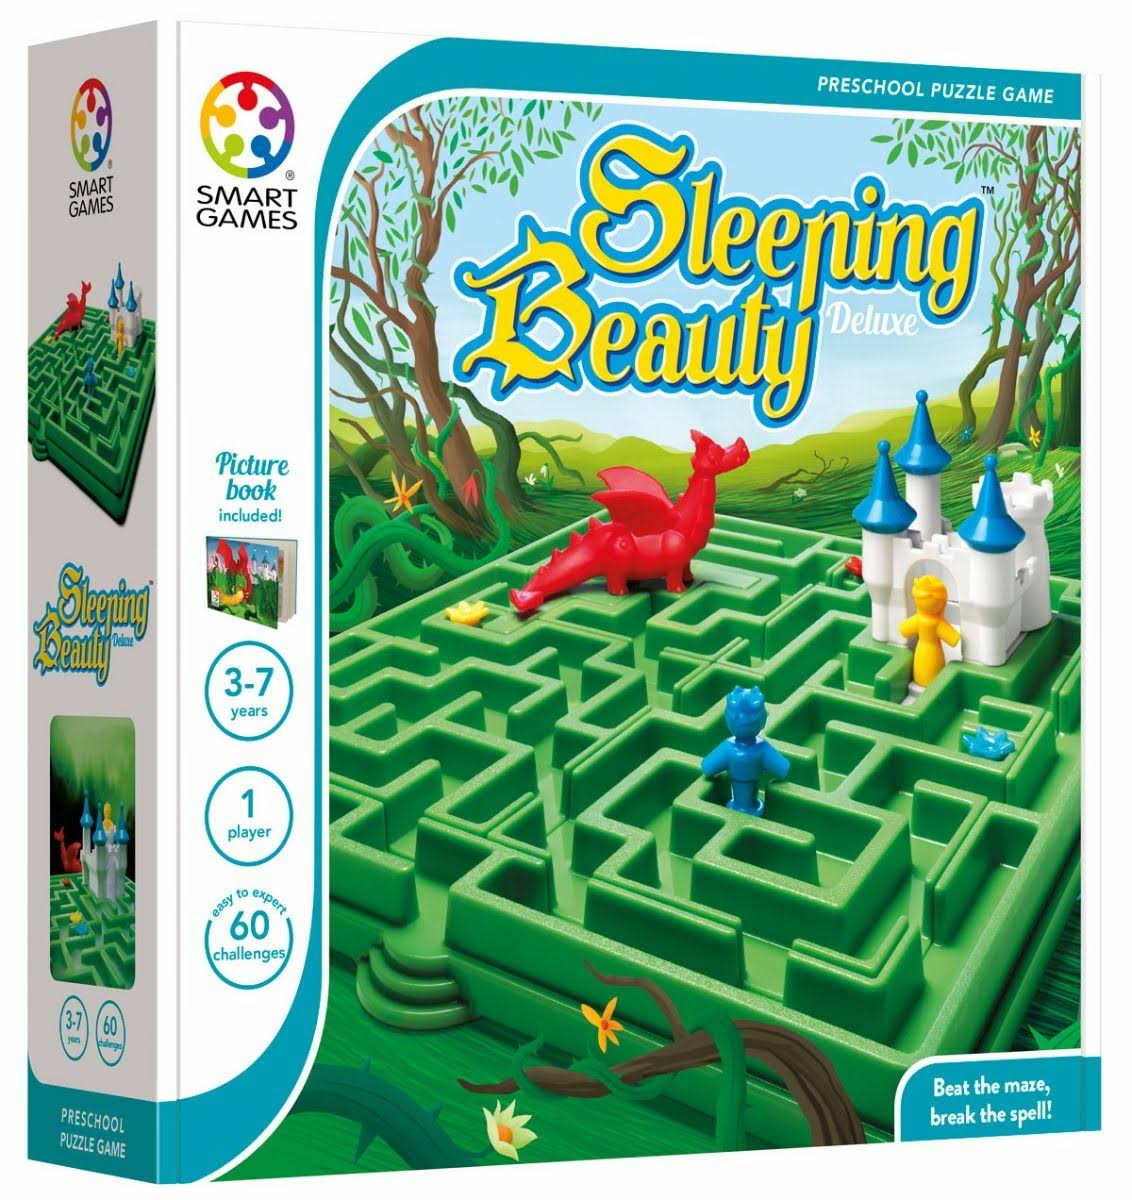 SmartGames Sleeping Beauty Deluxe Maze Puzzle Toy